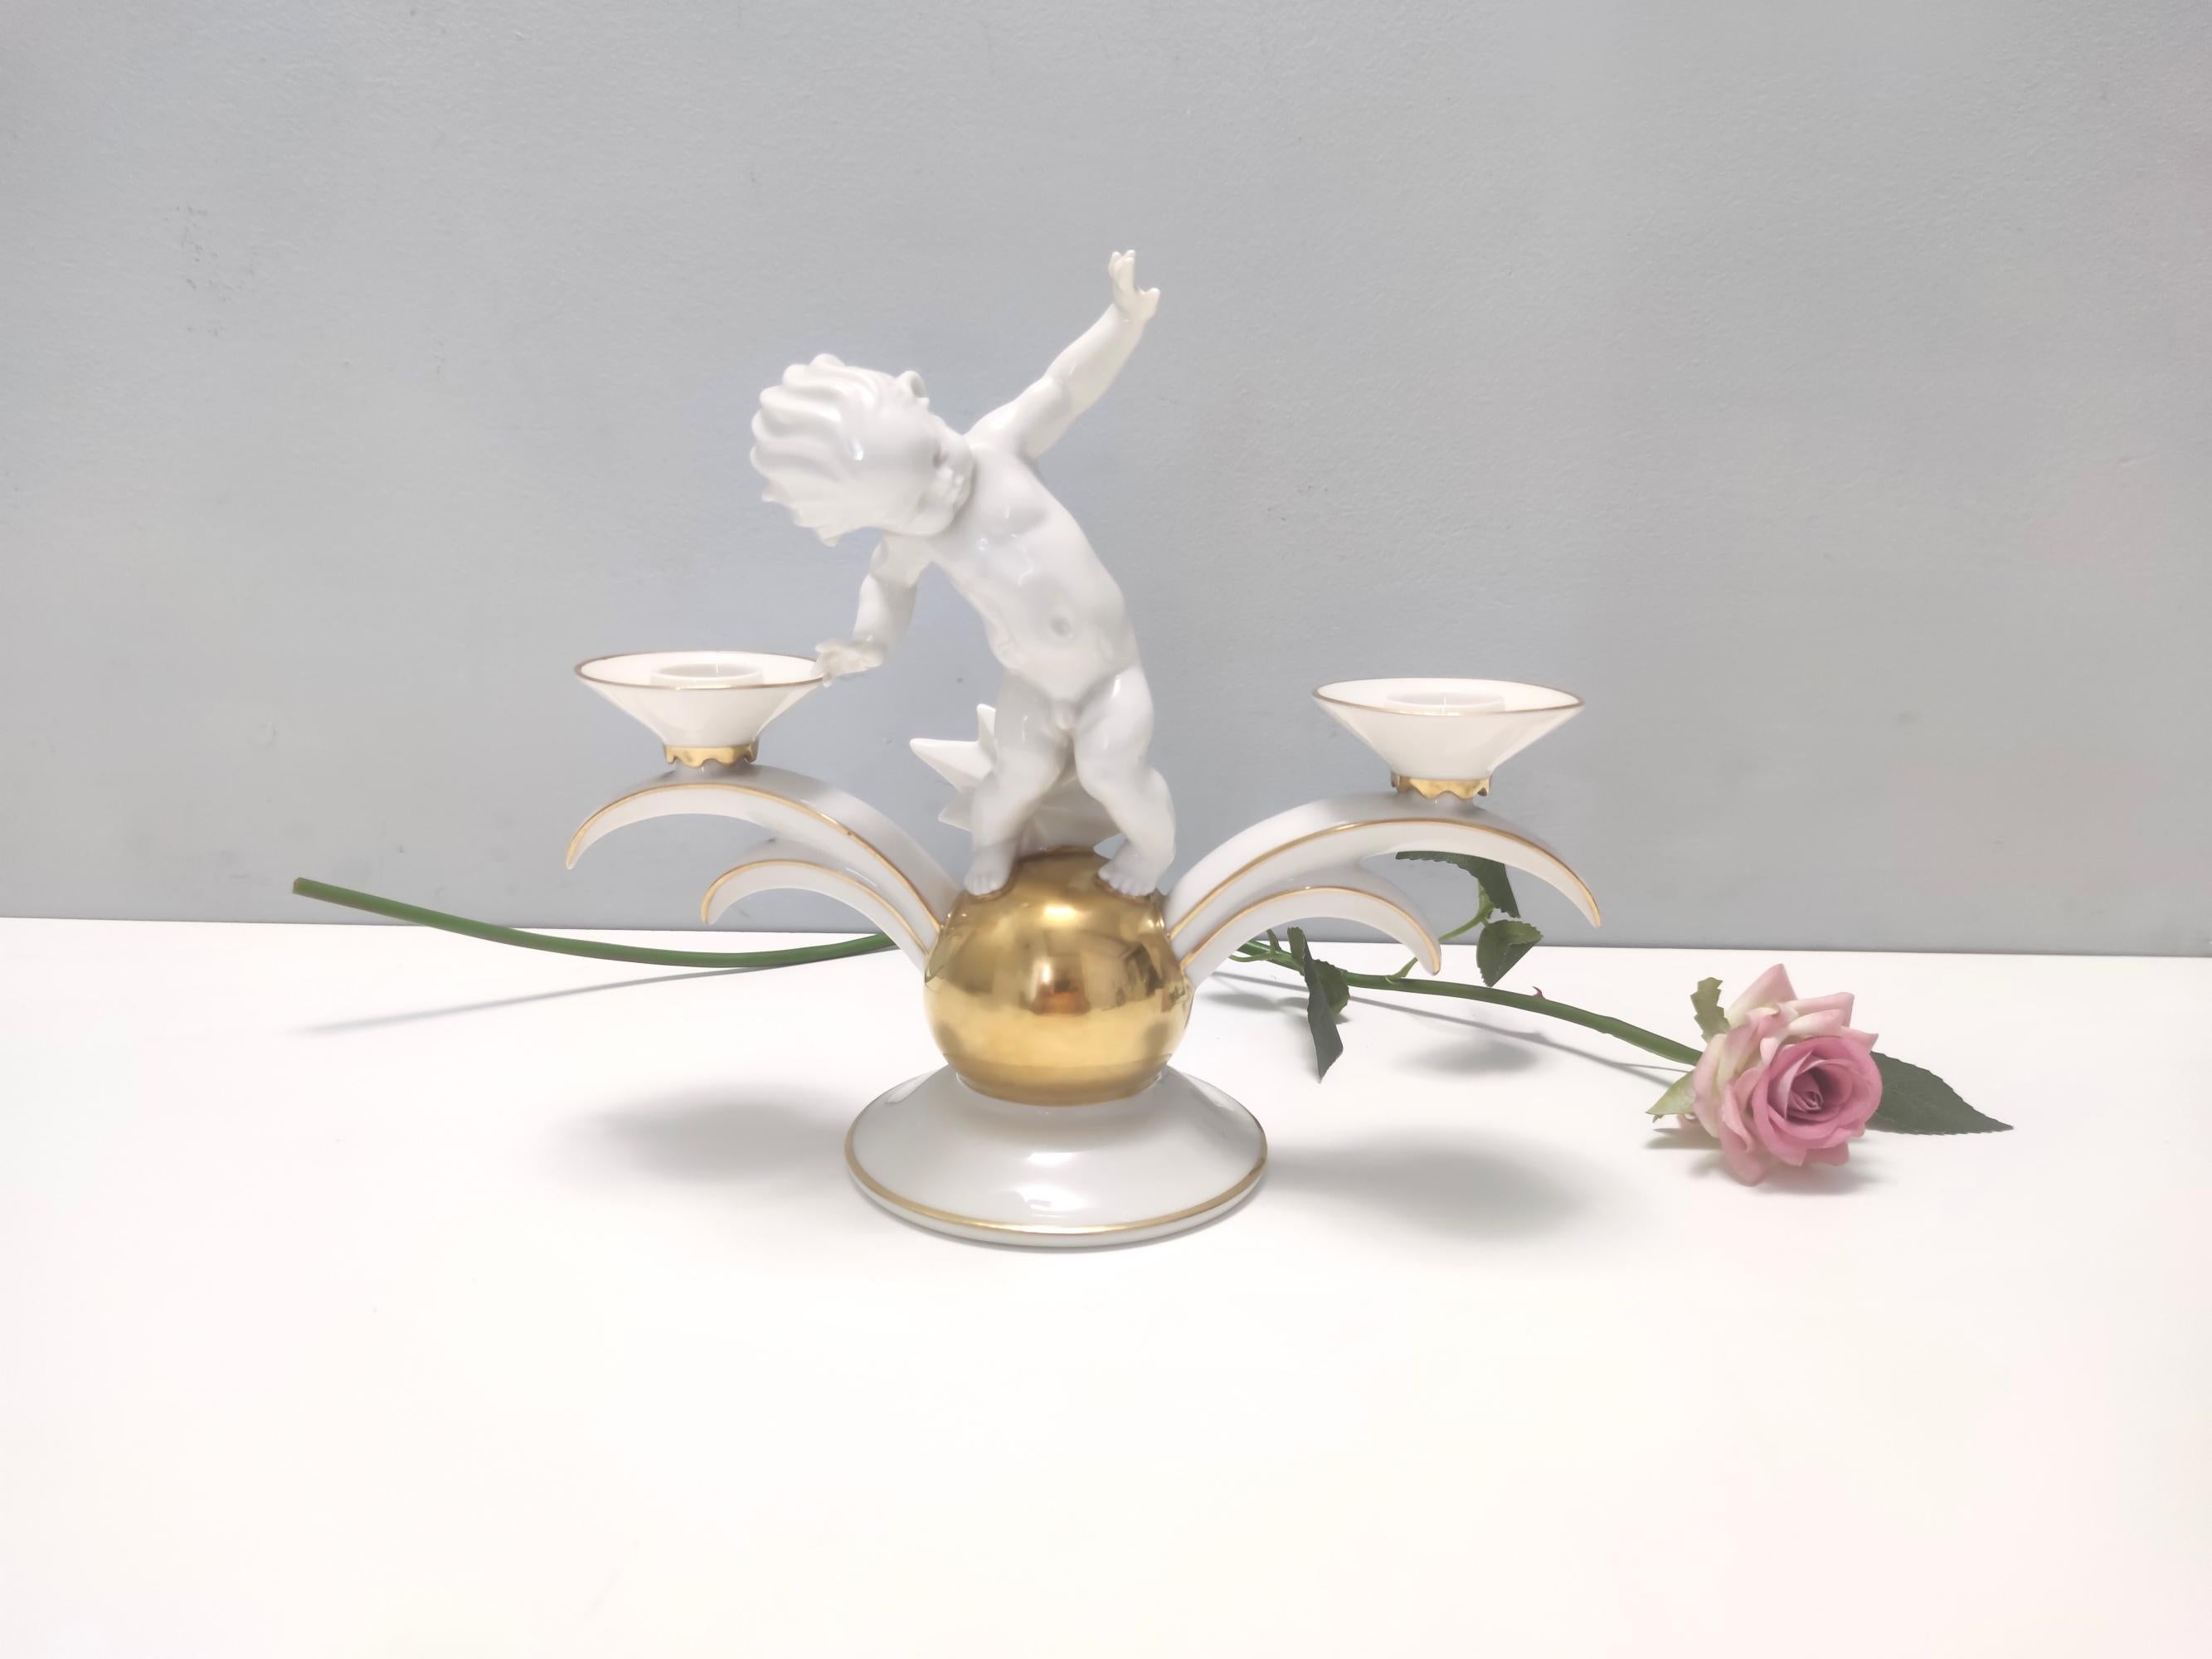 Made in Germany, 1930s. 
This high-quality two-arm candle holder is made in white and gold glazed porcelain by Karl Tutter for Hutschenreuther.  
It is. vintage piece, therefore it might show slight traces of use, but it can be considered as in